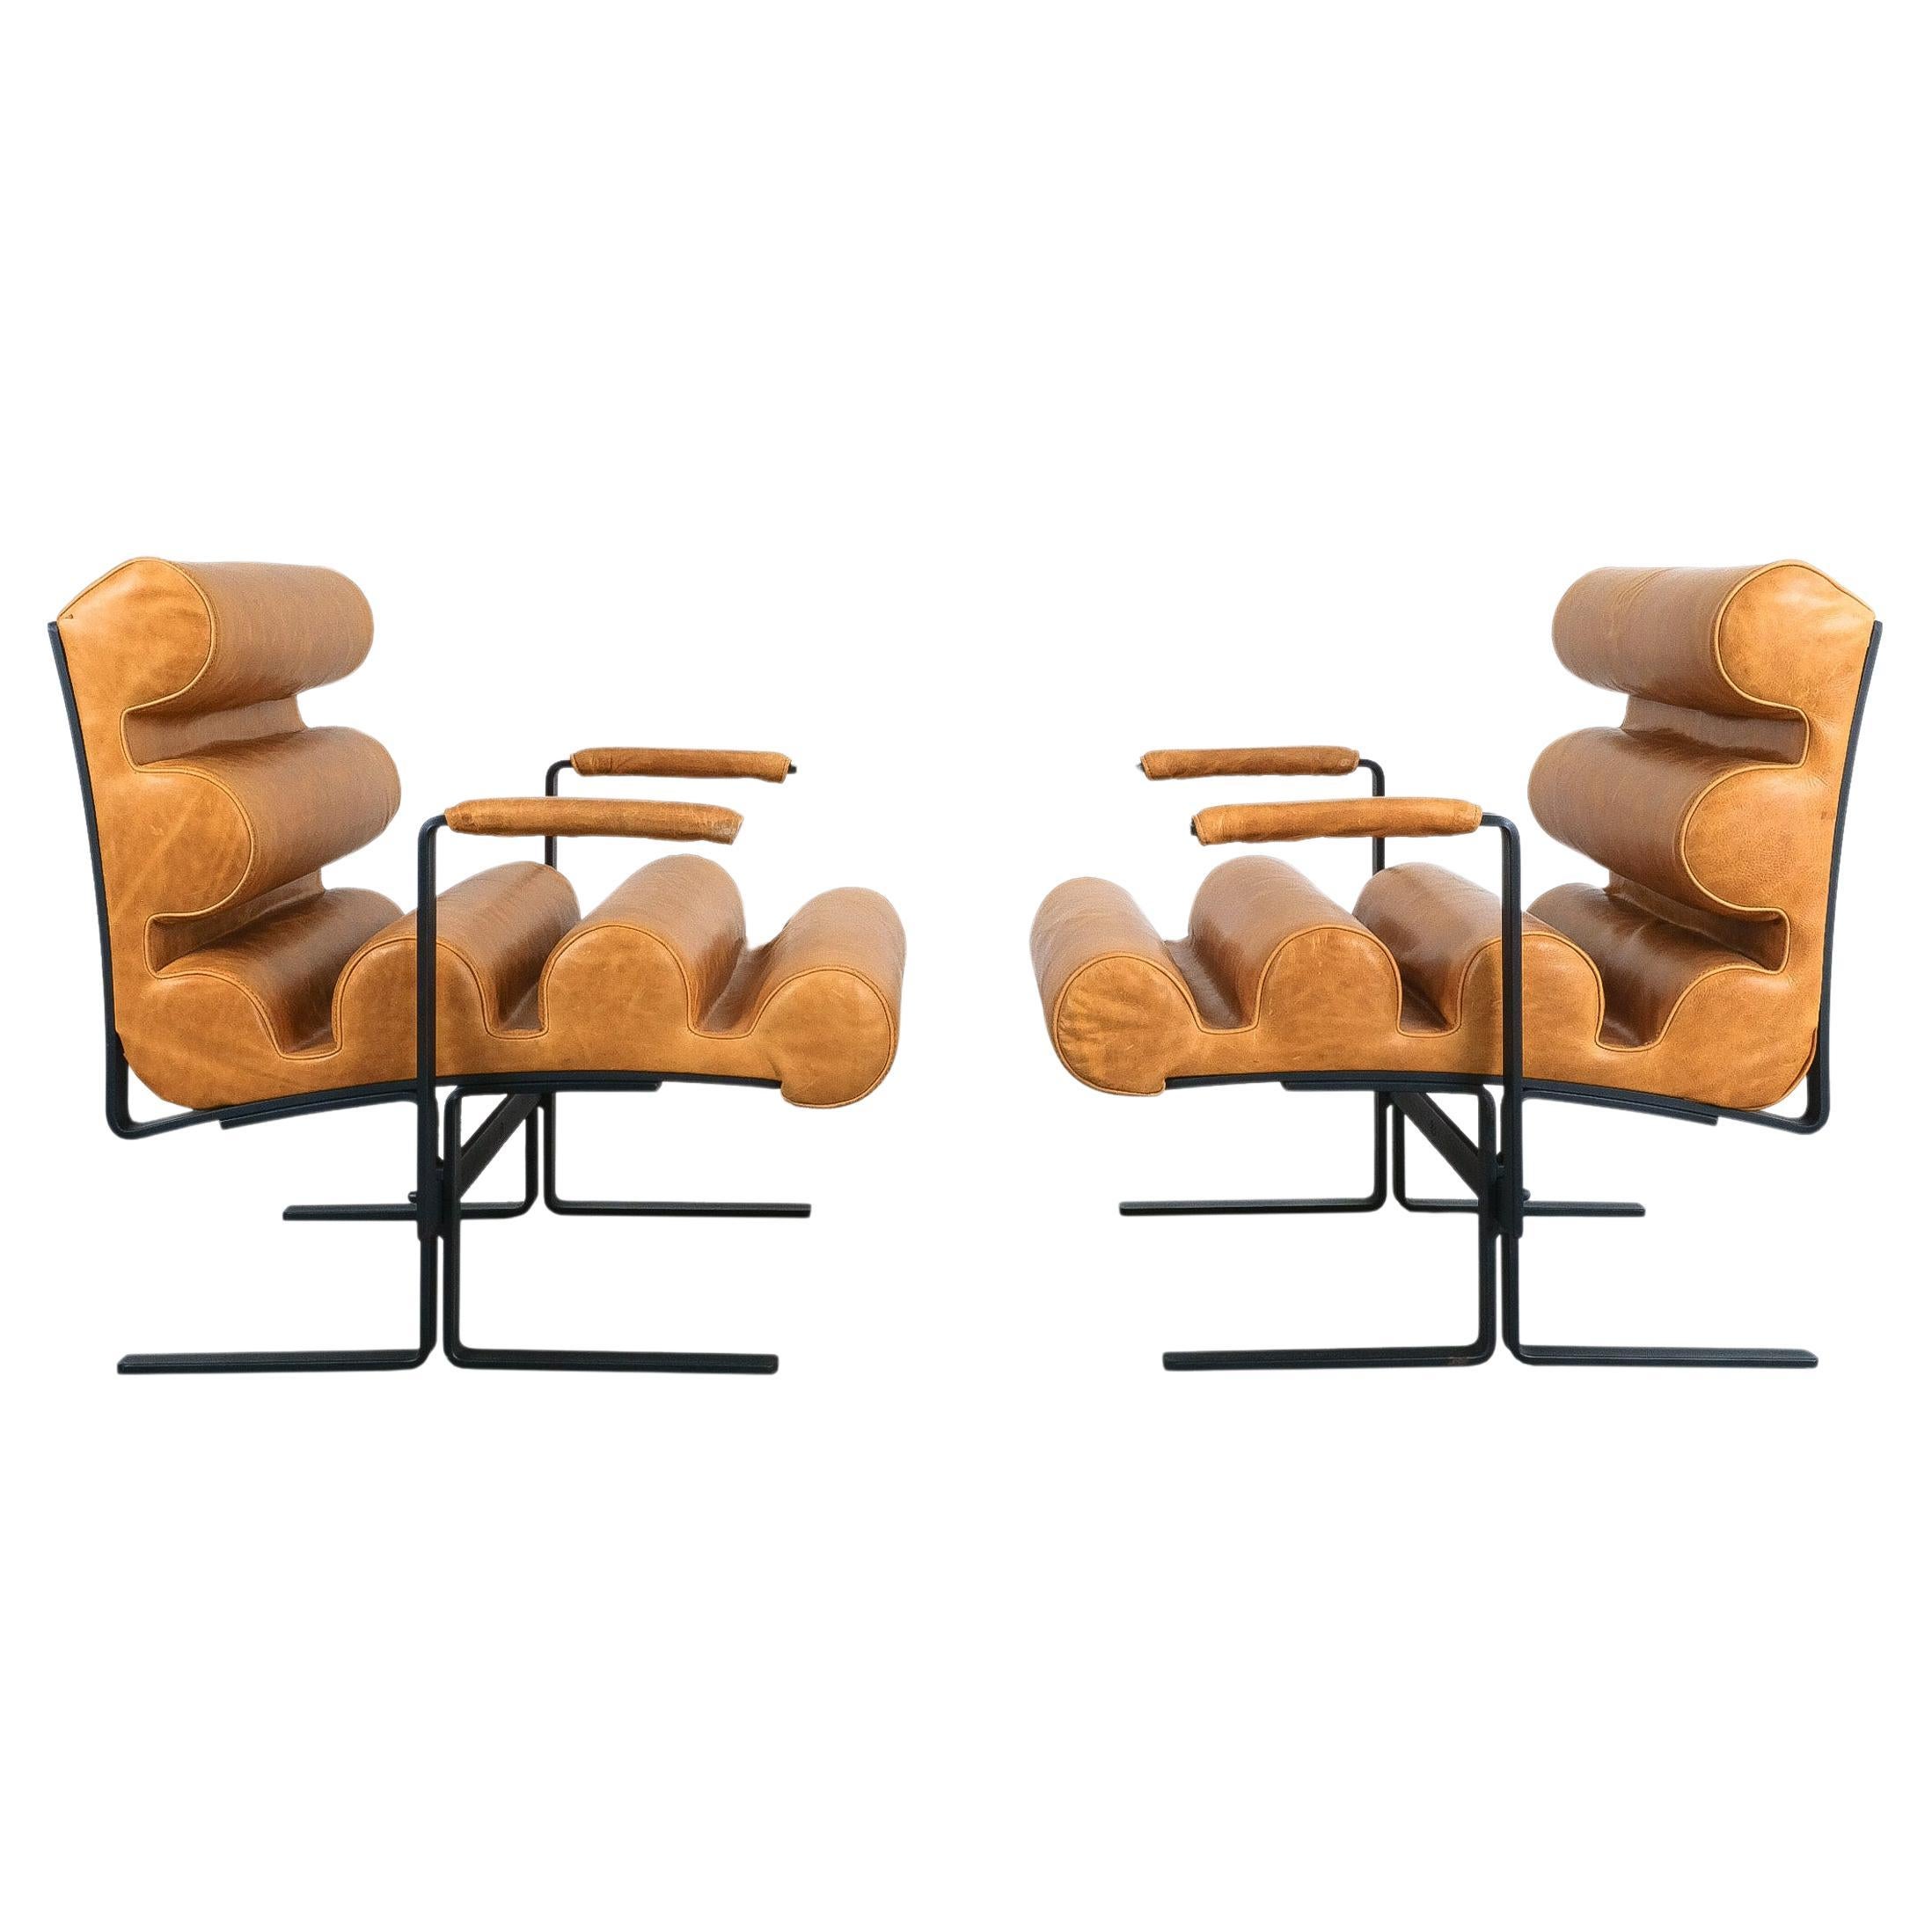 Joe Colombo For Sormani Roll Brown Leather Spring Steel Armchair Pair (2) , 1962